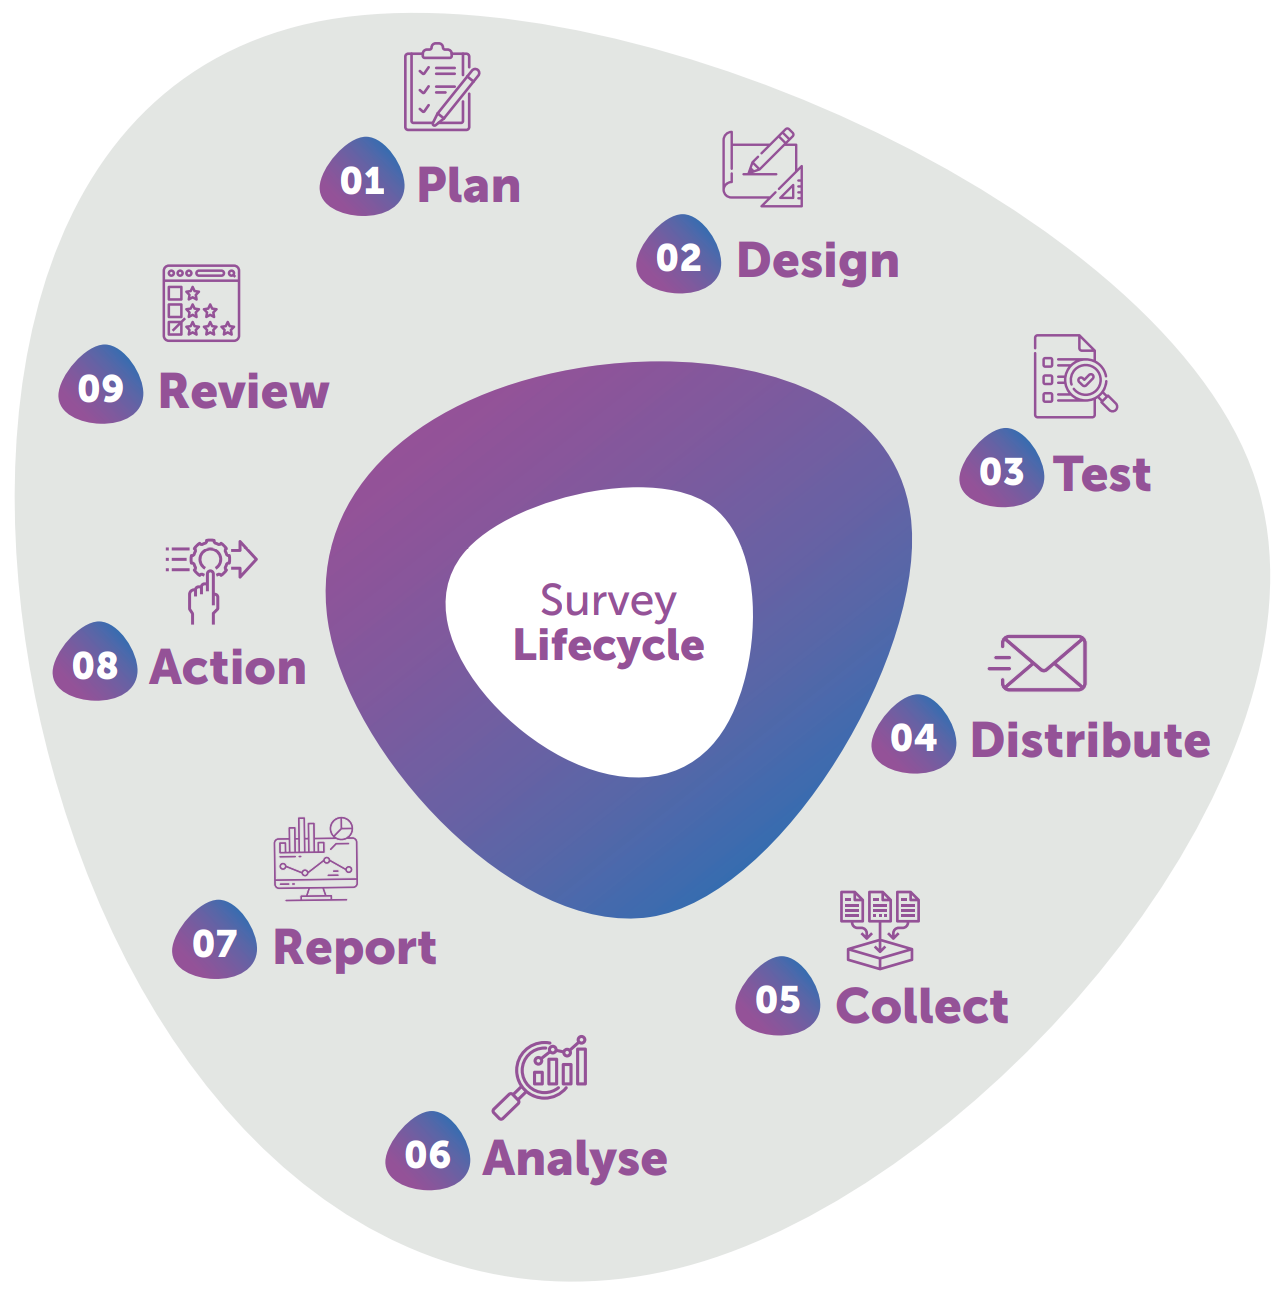 The survey lifecycle